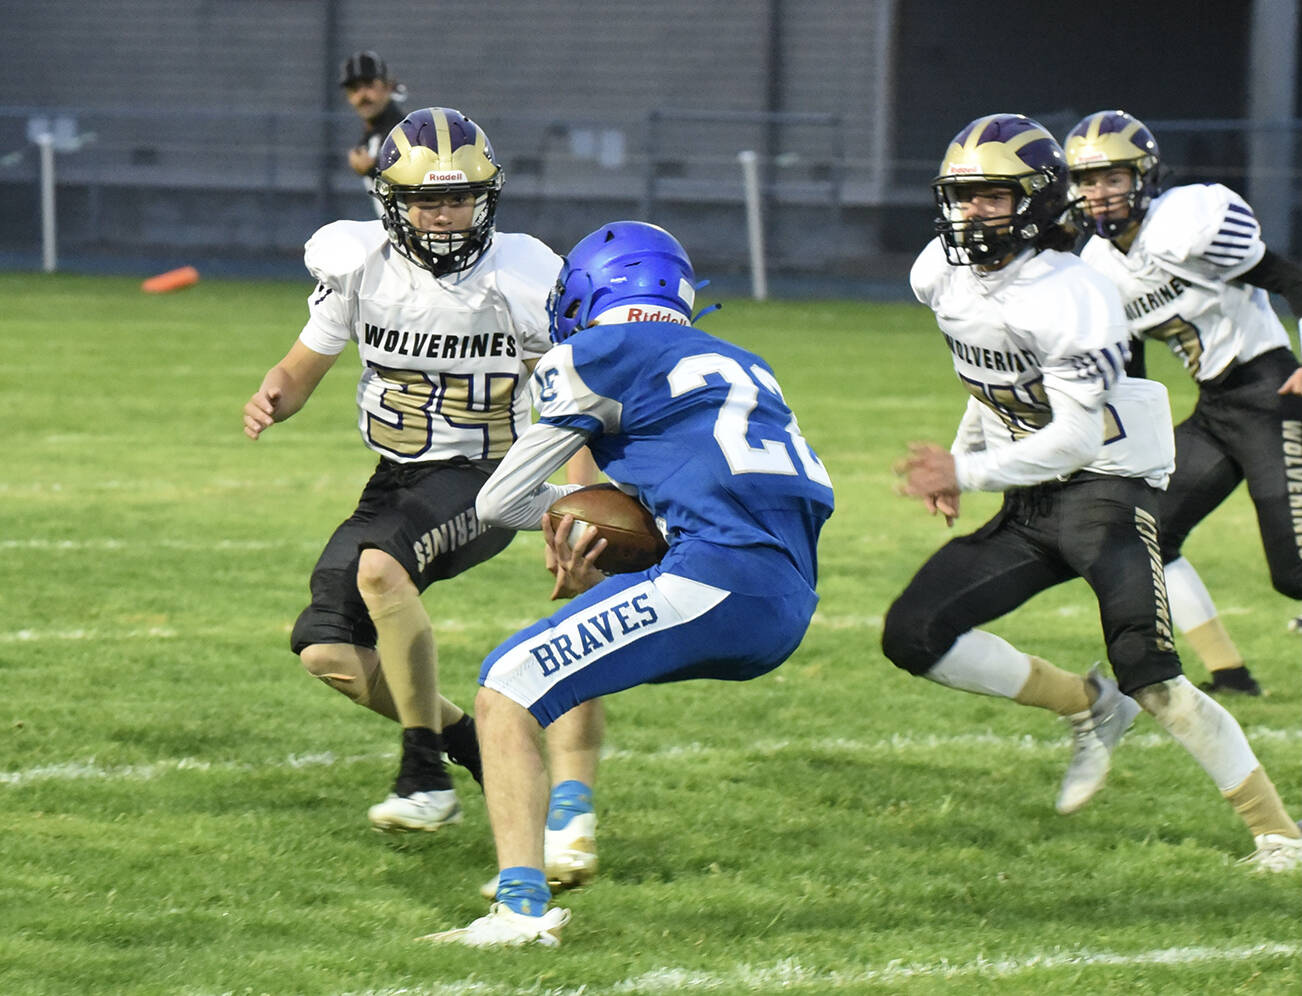 Wolverine Whiley McCutcheon, #34, and Connor Haines, #14, put a stop to the Braves running back. (John Stimpson photo)